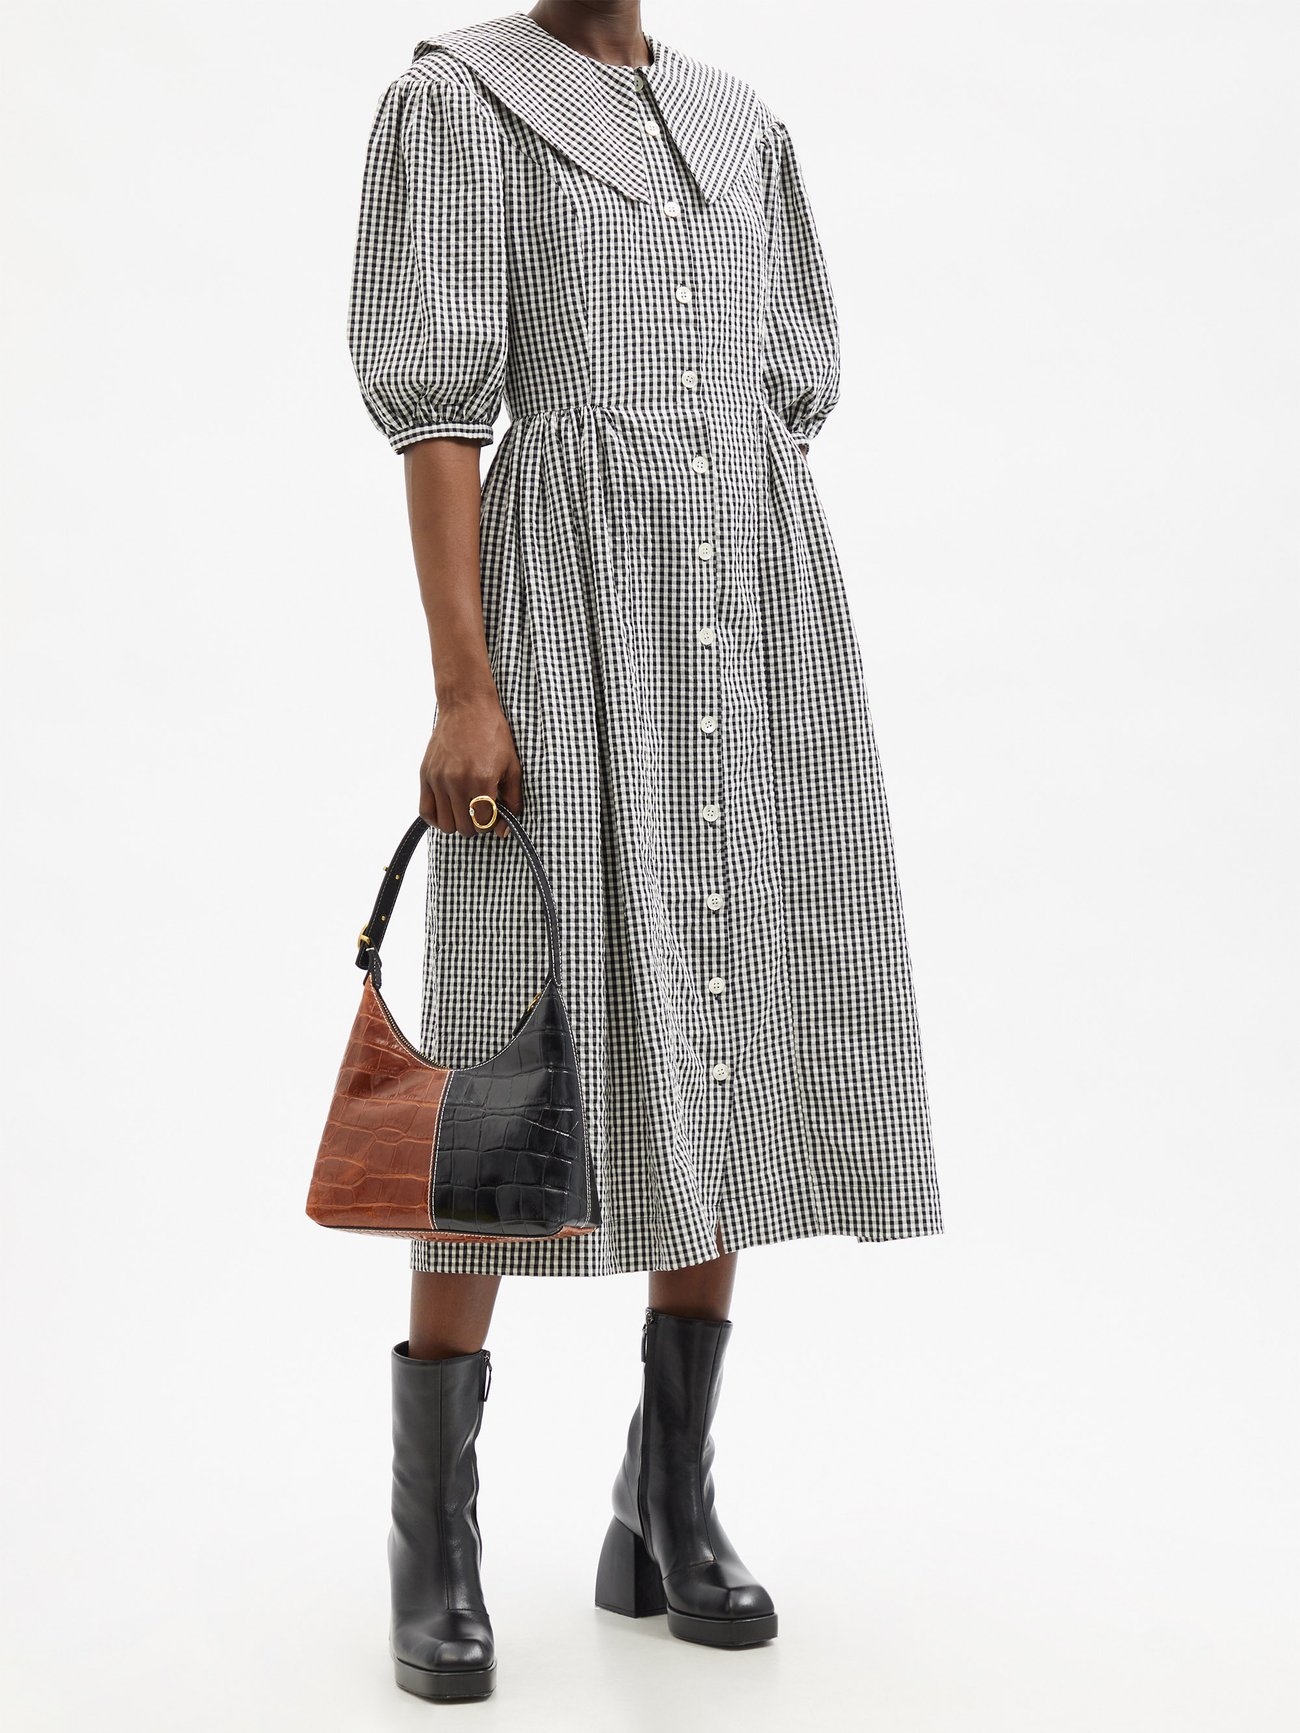 SHRIMPS Olivia black & white cotton-gingham shirt dress with puff sleeves, £425